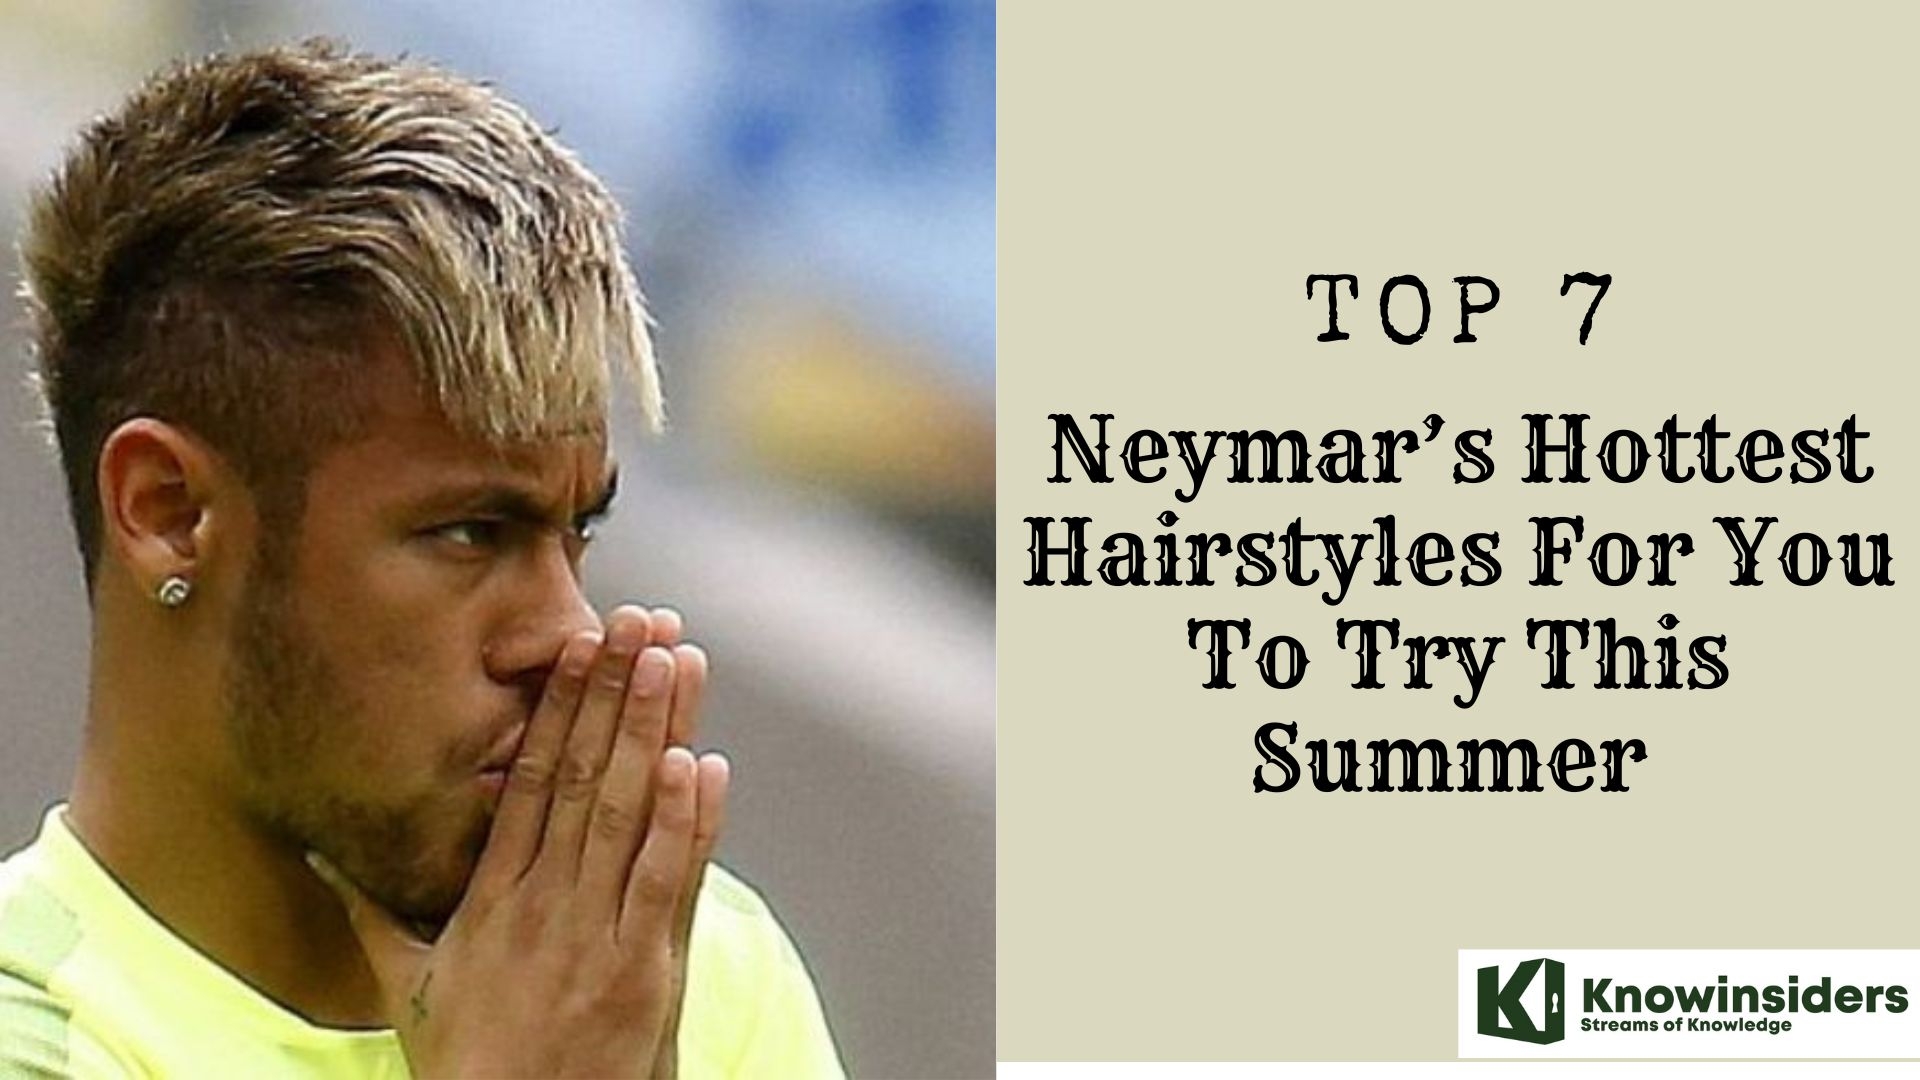 Top 7 Neymar’s Hottest Hairstyles For You To Try This Summer  Knowinsiders.com